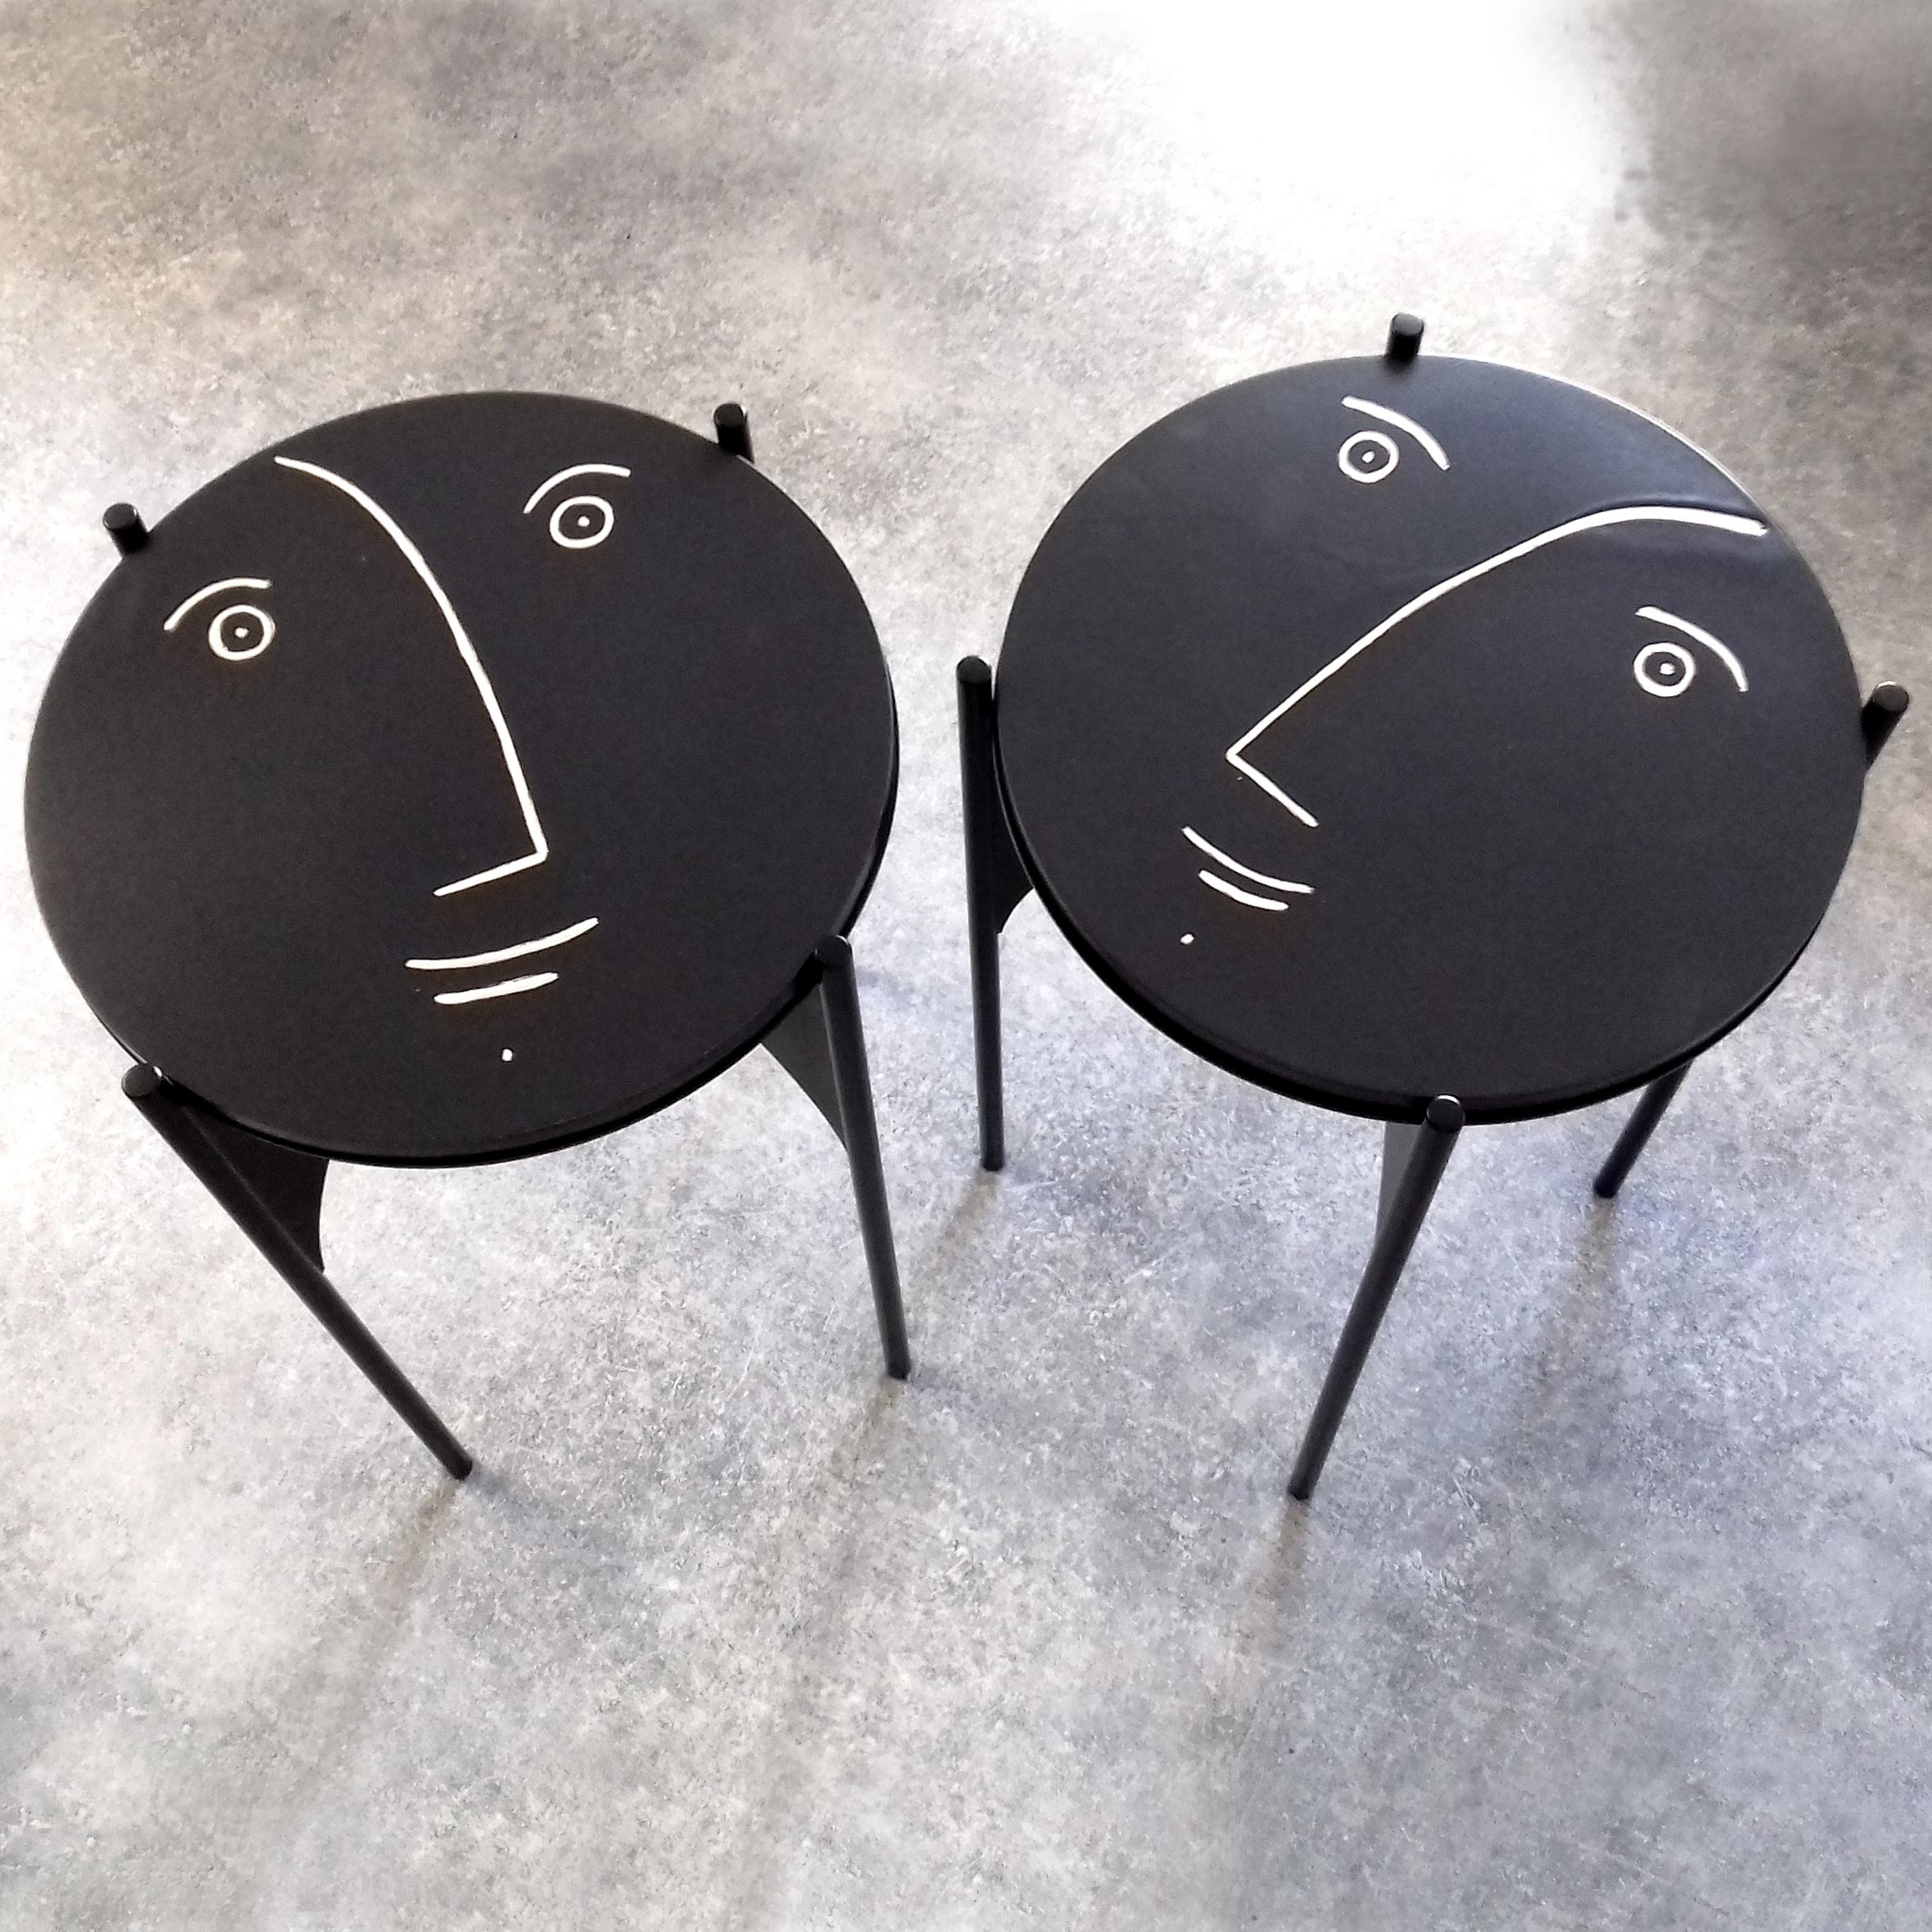 Pair of Side Tables Black Metal Frame and Ceramic Tops by Dalo In Excellent Condition For Sale In Paris, FR